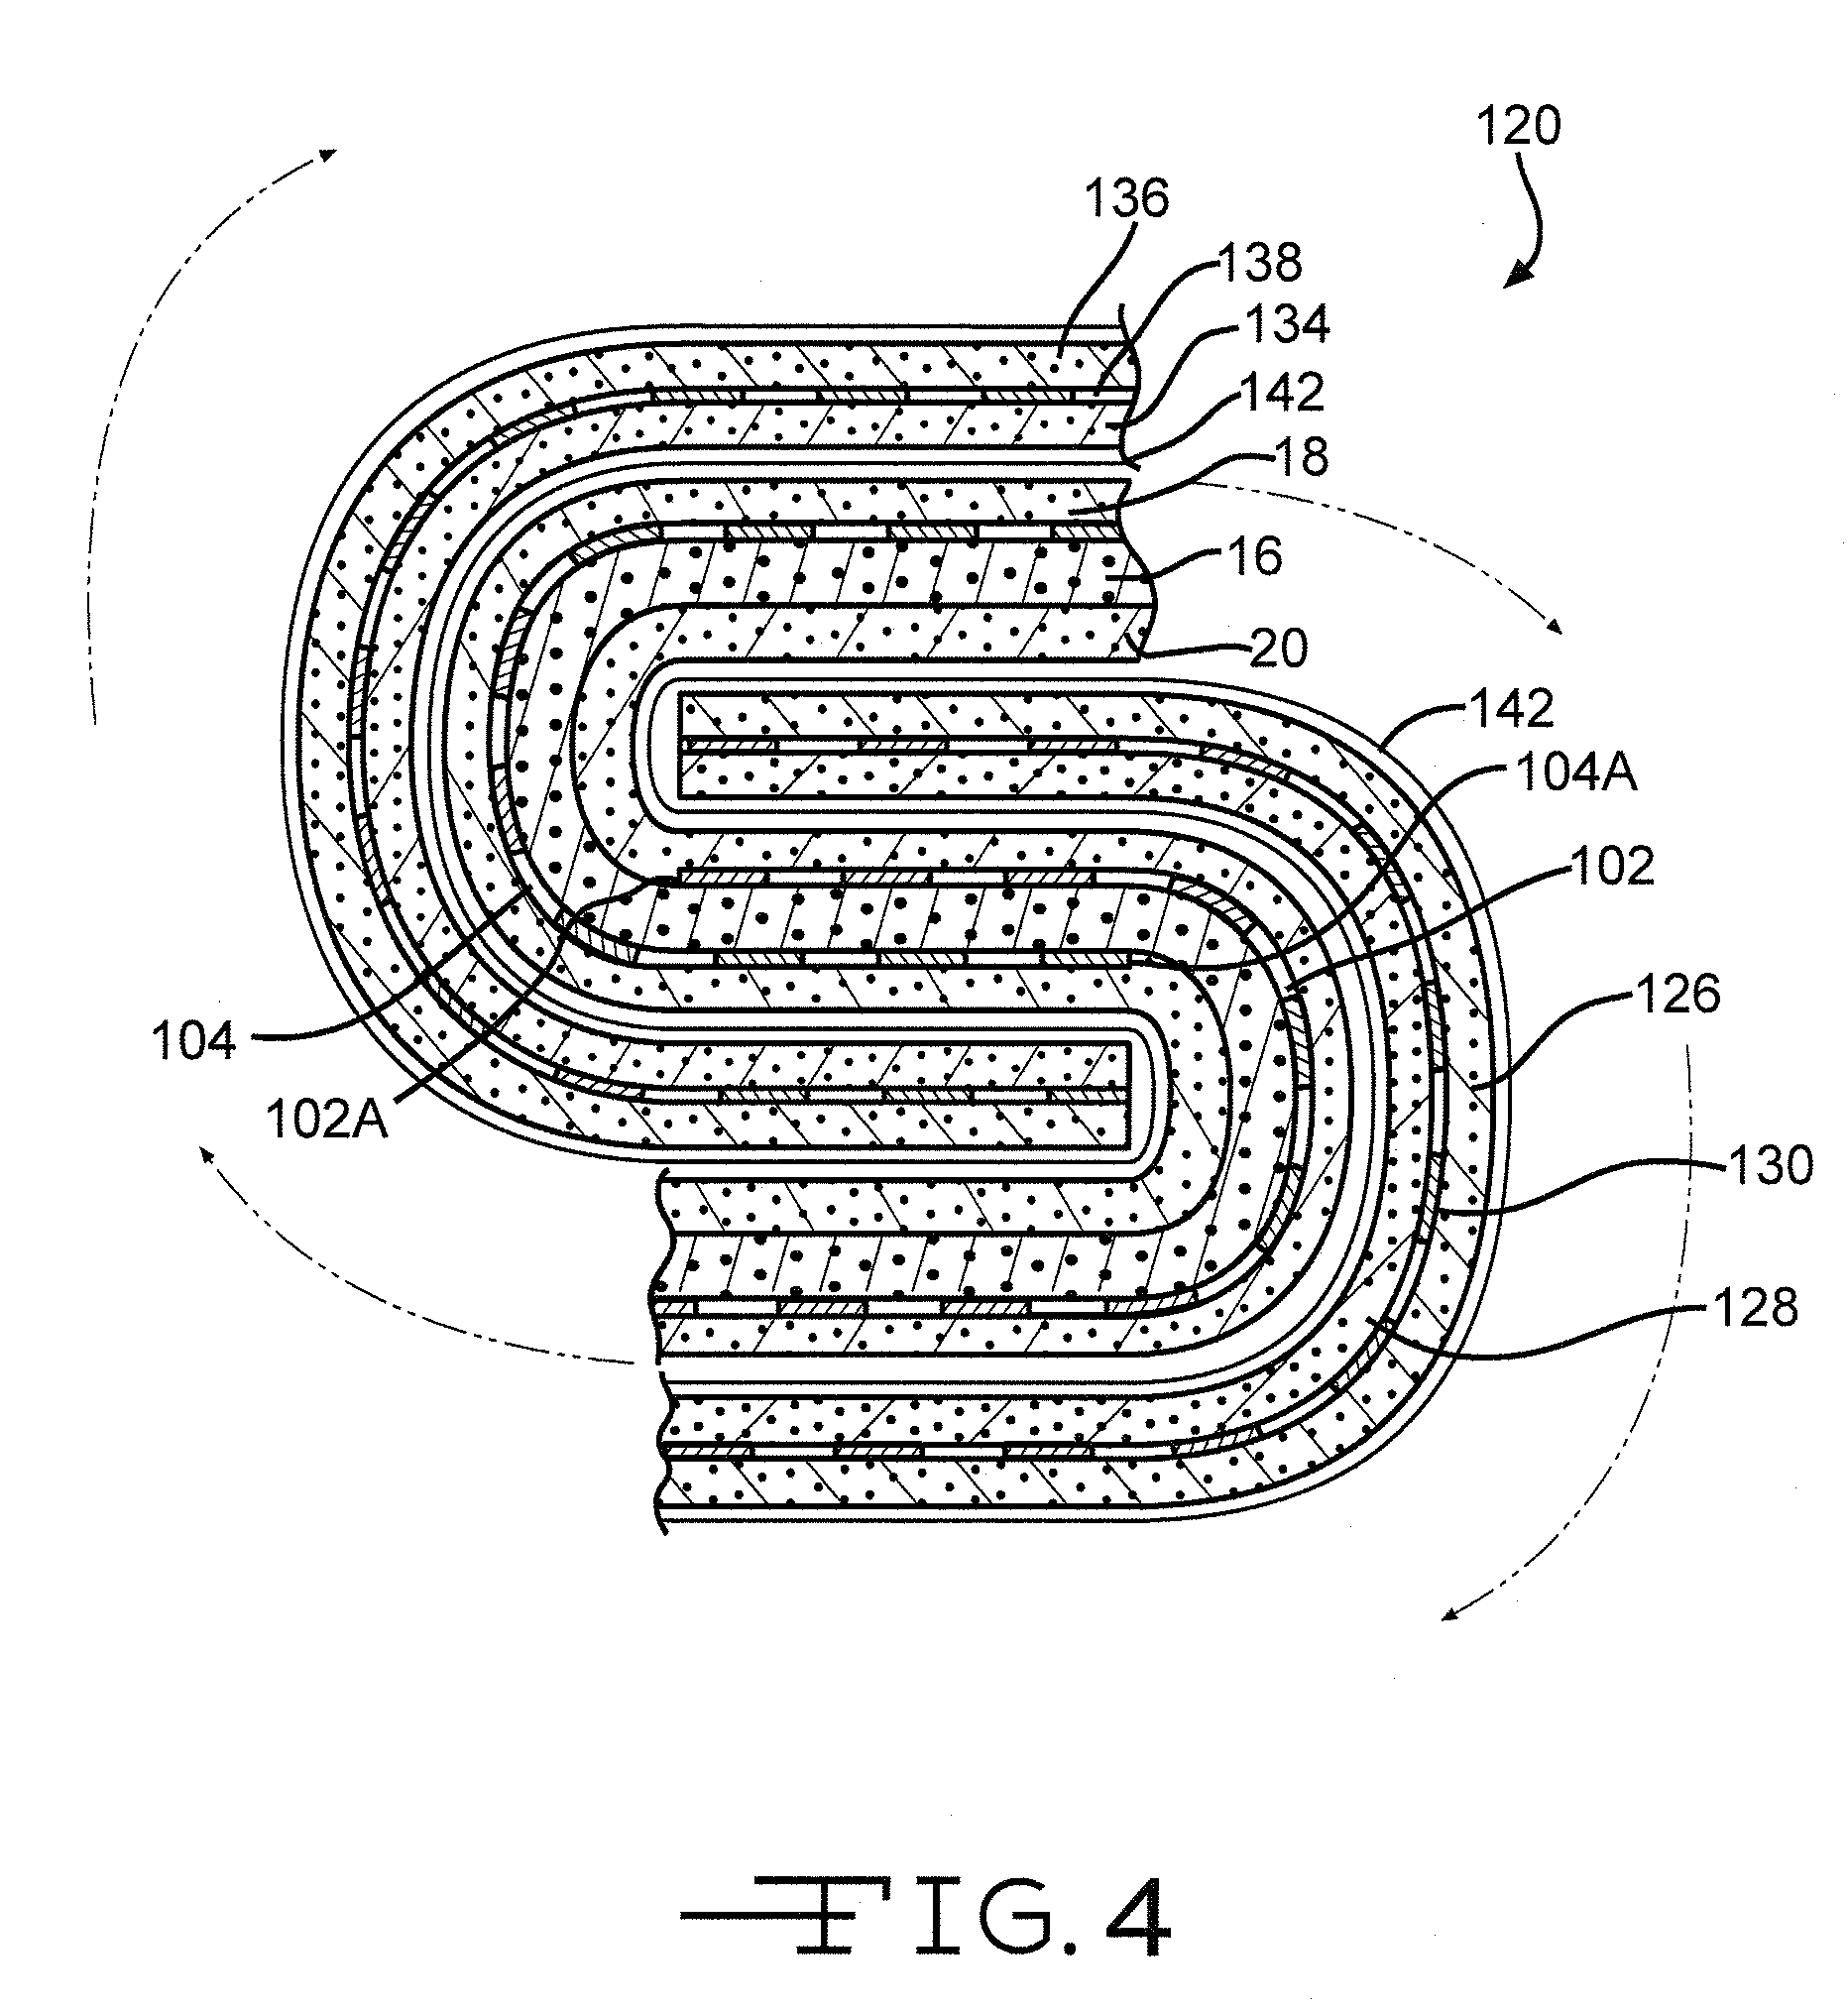 Sandwich Cathode Electrochemical Cell With Wound Electrode Assembly